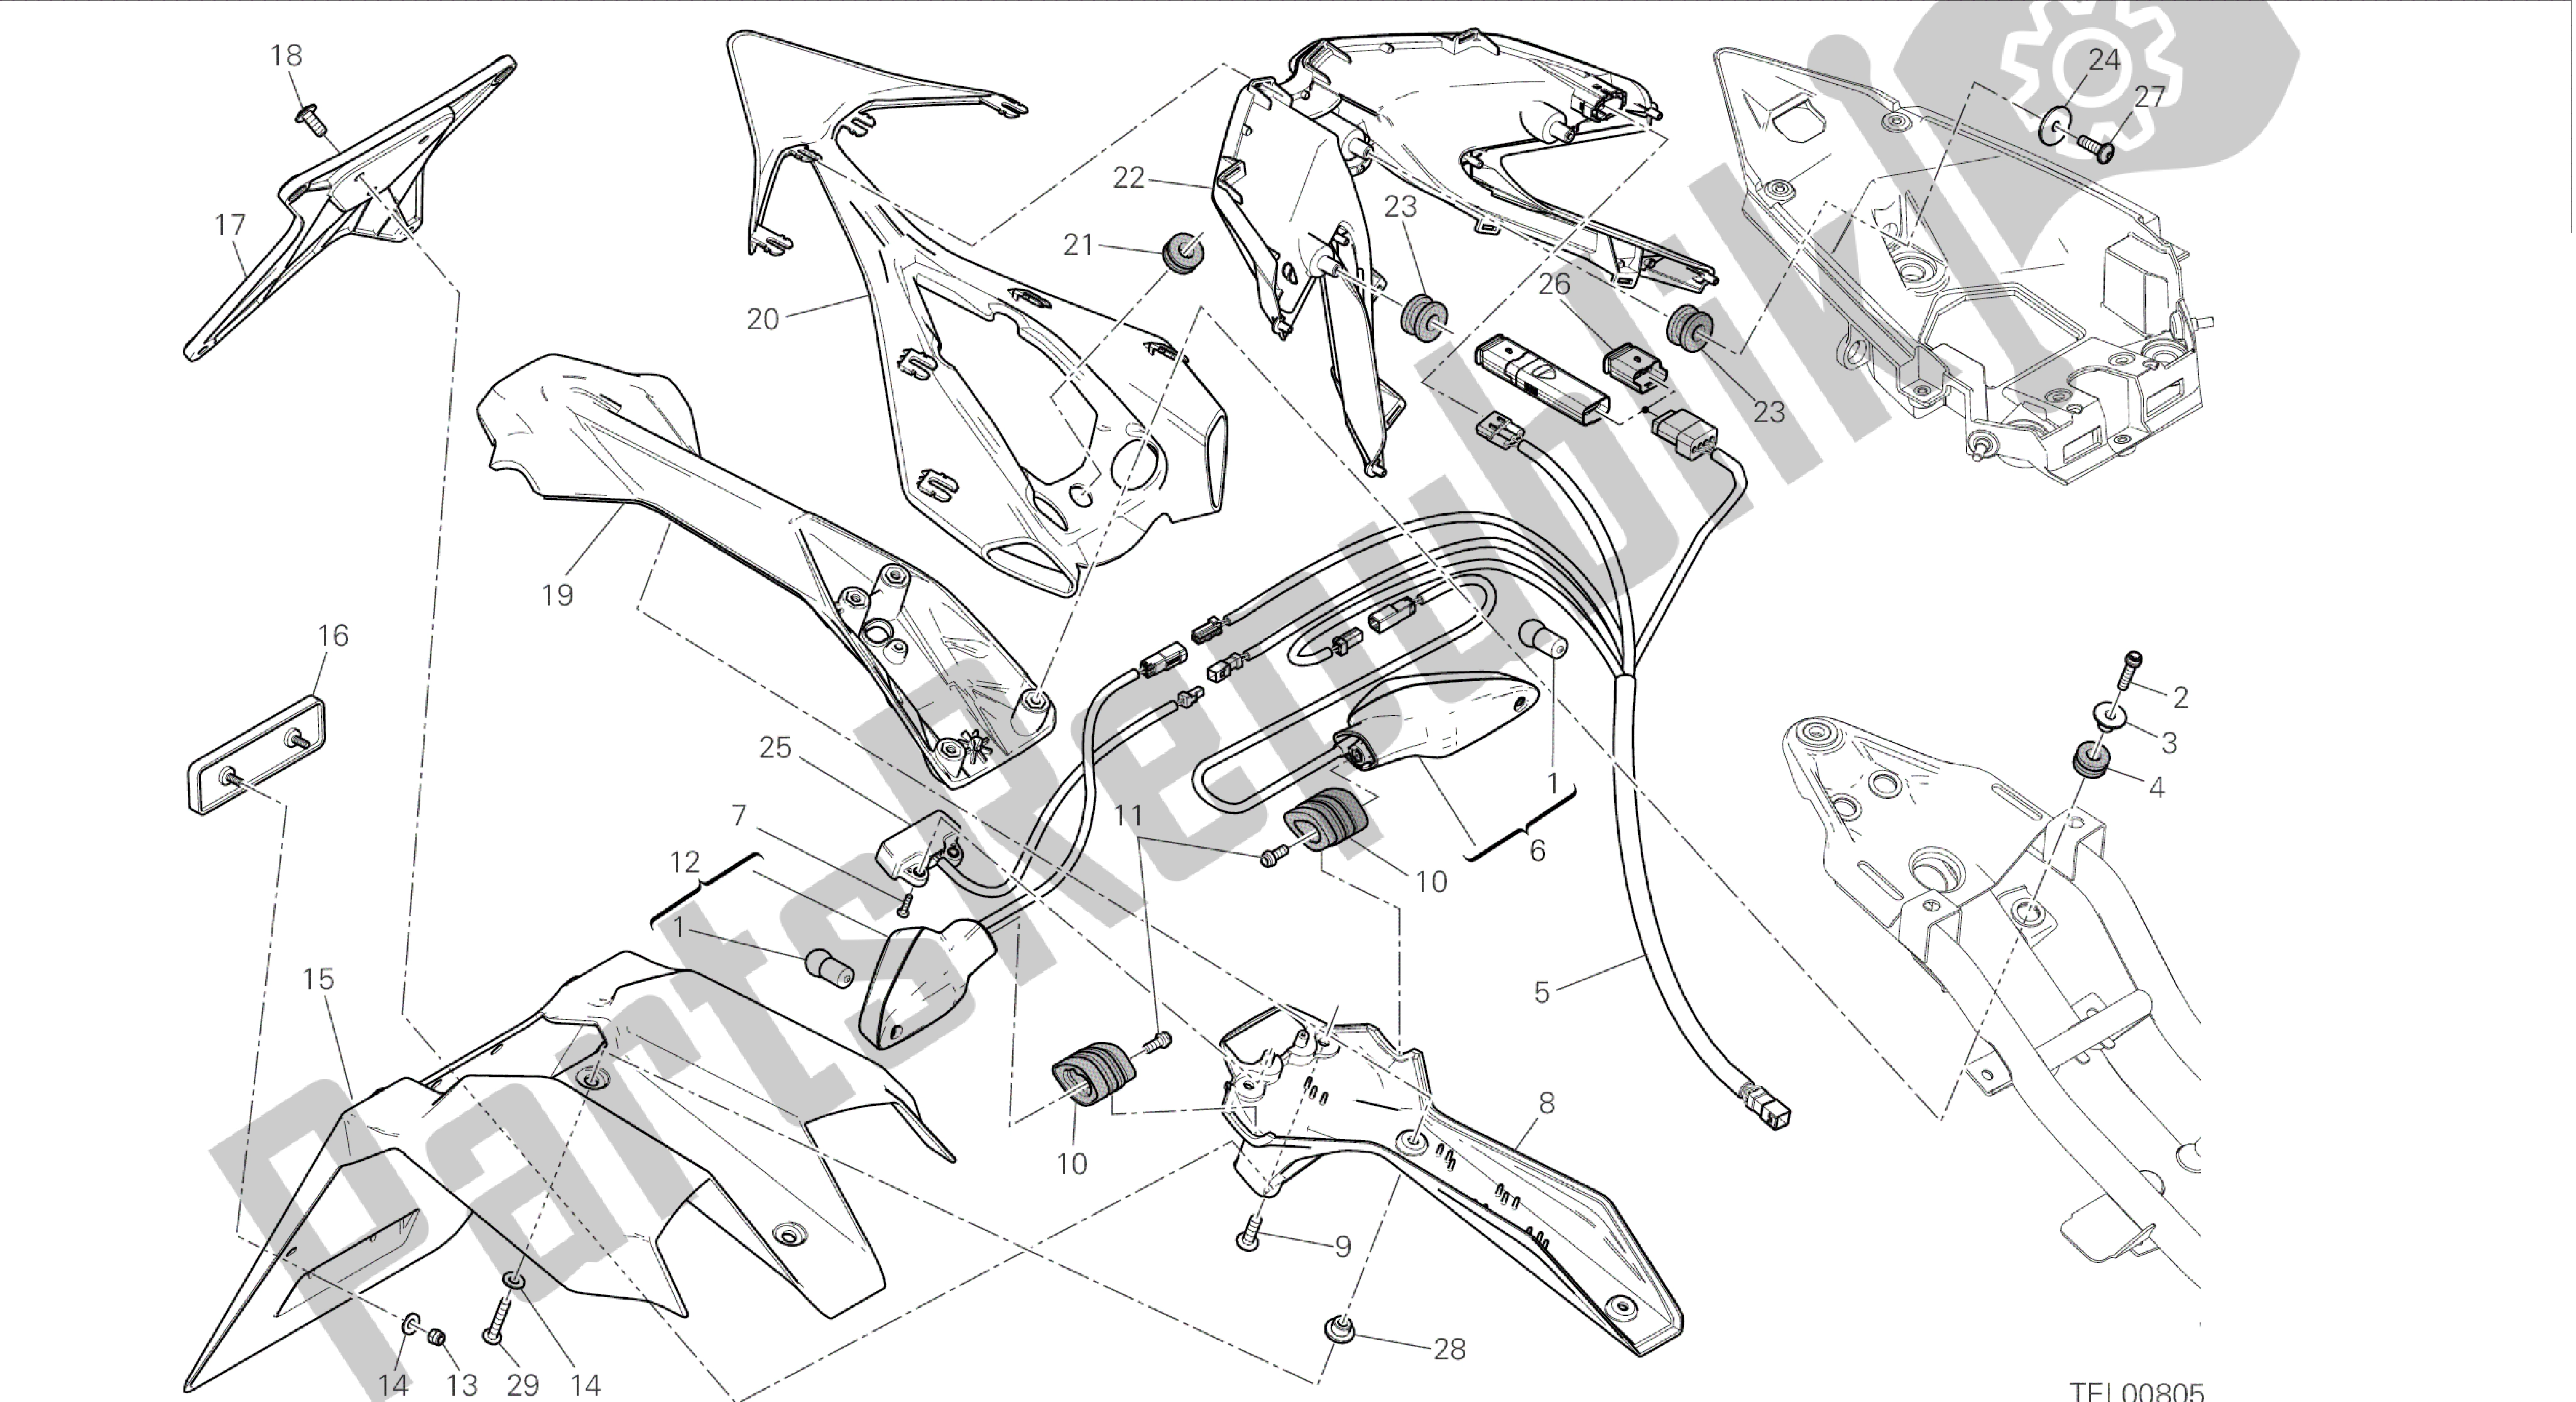 All parts for the Drawing 27b - Number Plate Holder - Tail Light - (aus) [mod:899 Abs,899aws;xst:aus]group Frame of the Ducati Panigale 899 2015